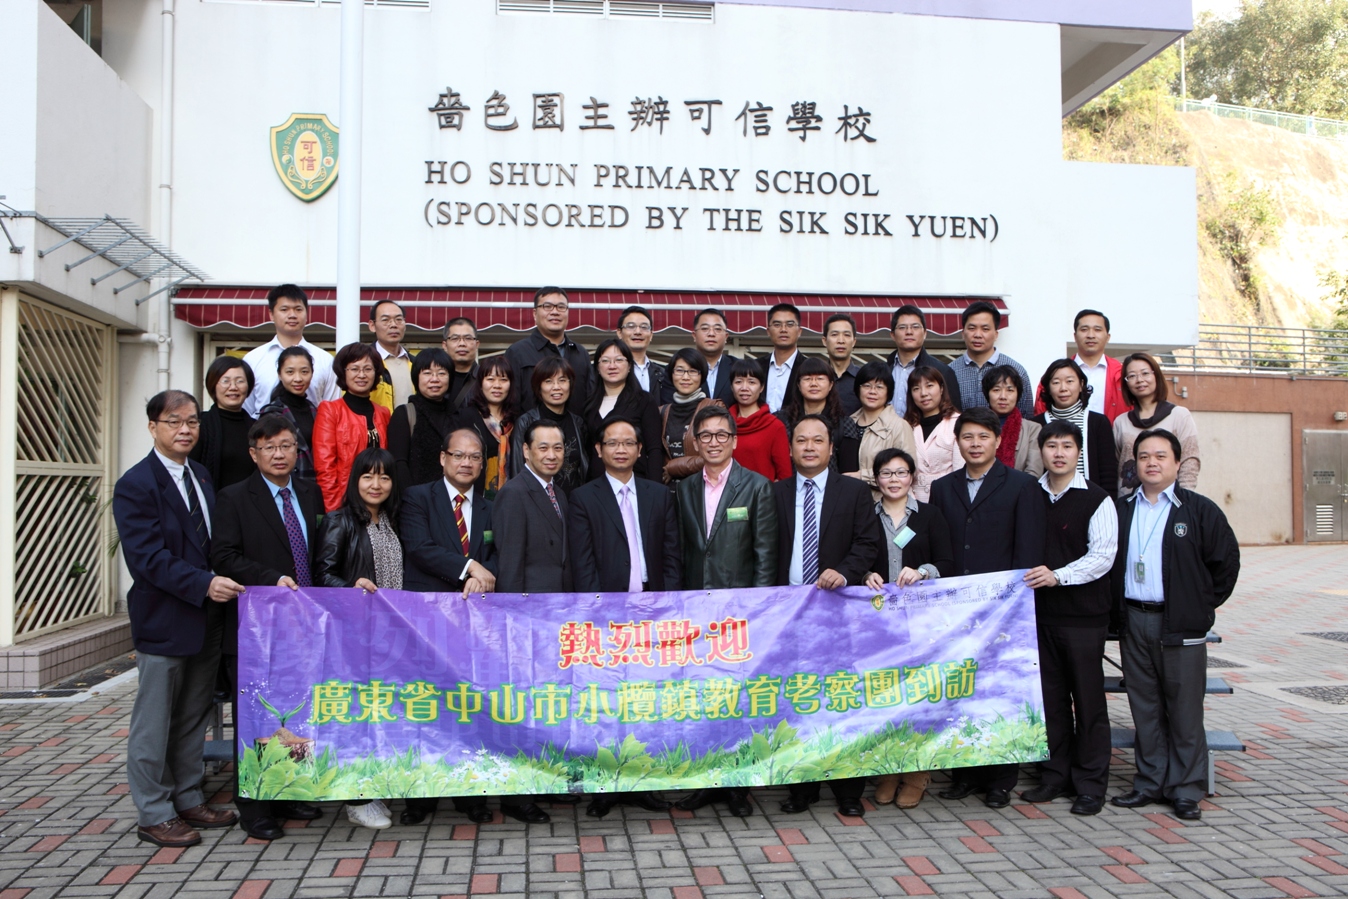 Education leaders of Xiaolan Town of Zhongshan Paid a Visit to Sik Sik Yuen’s Schools